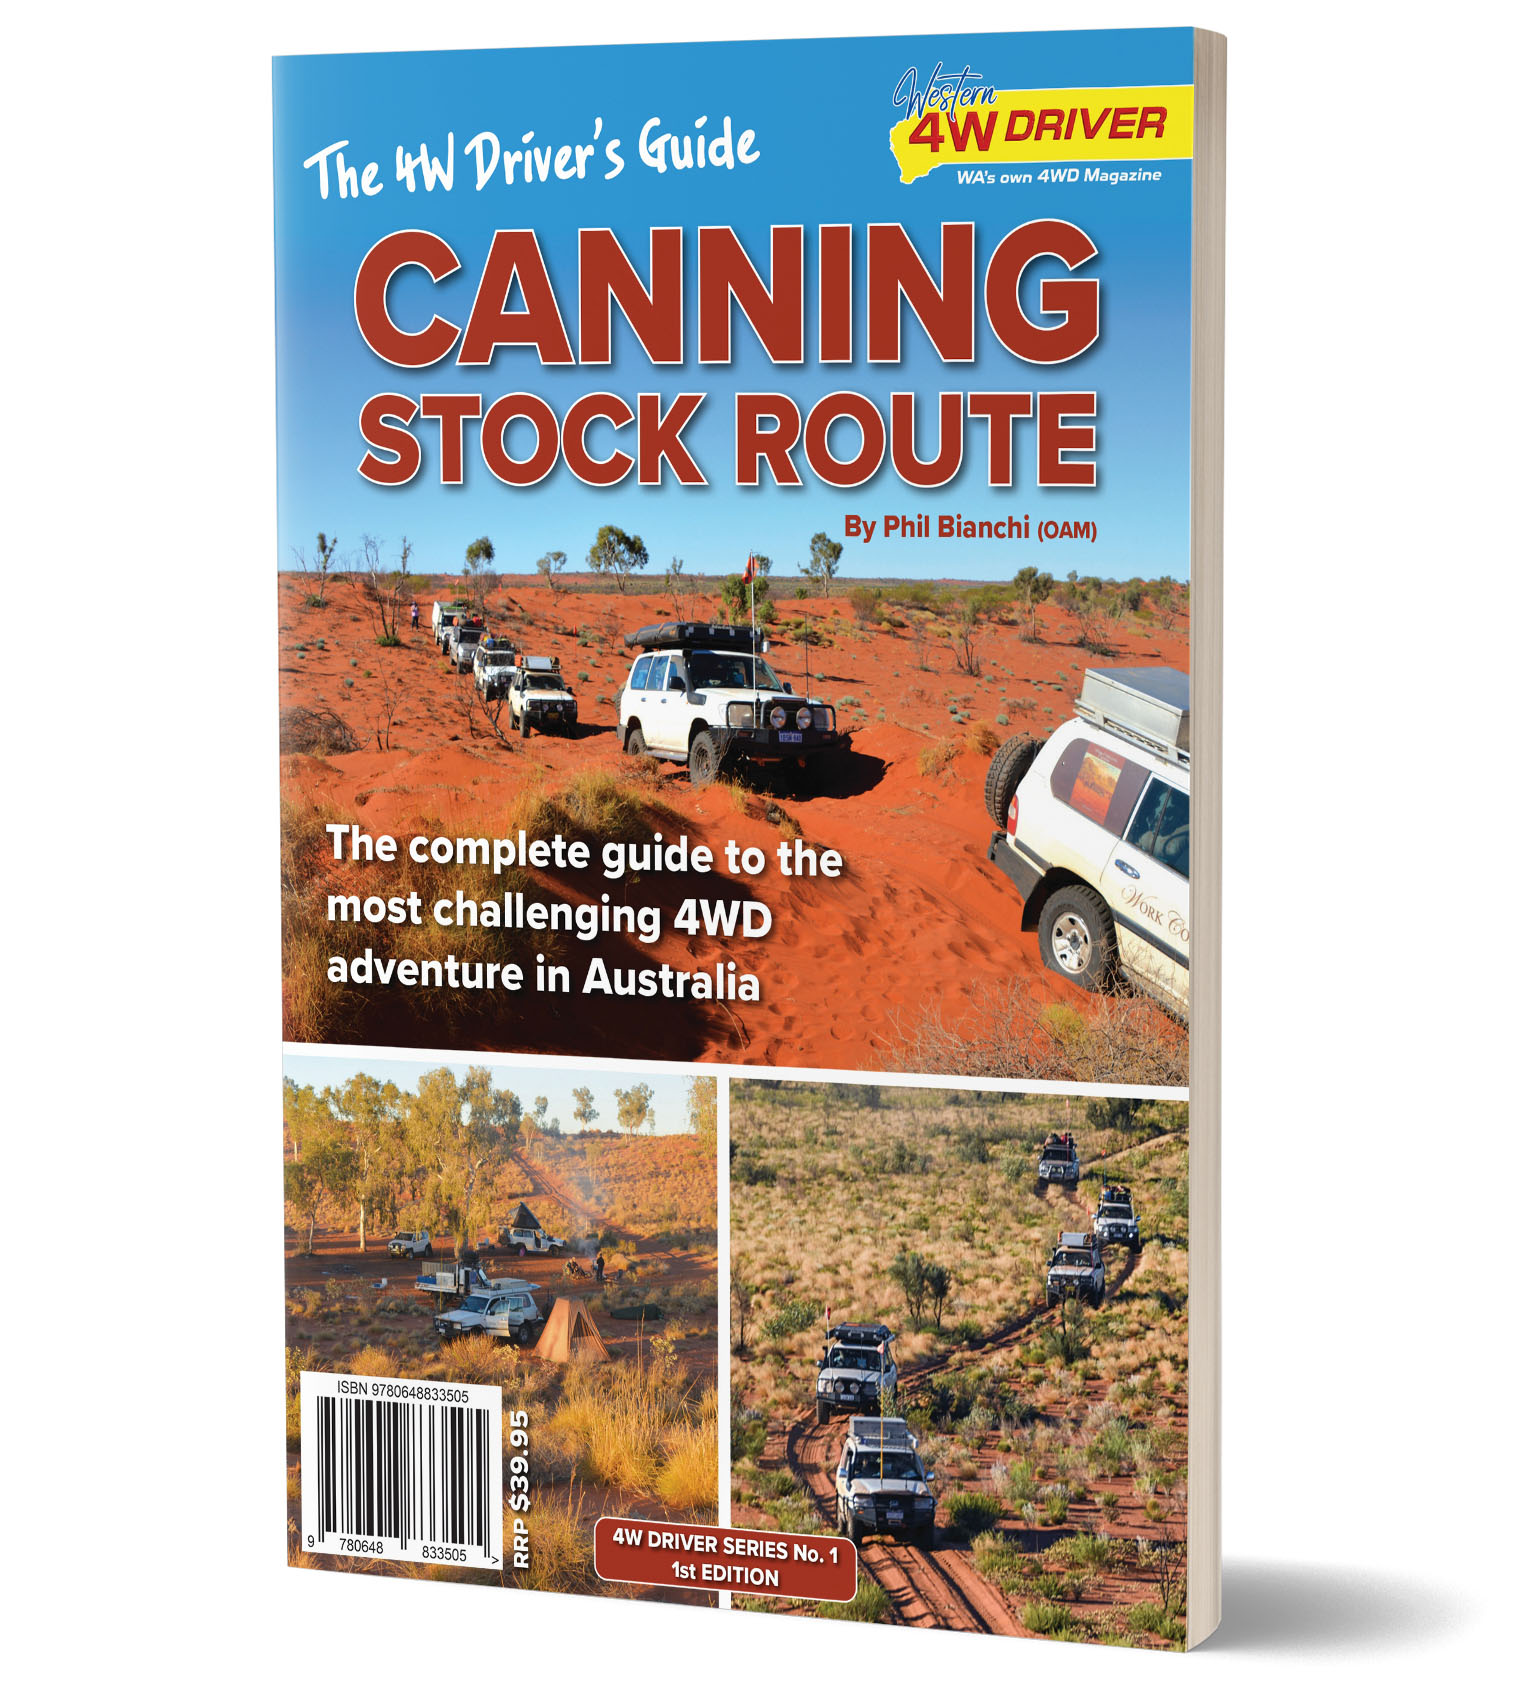 The 4WDriver's Guide: Canning Stock Route 